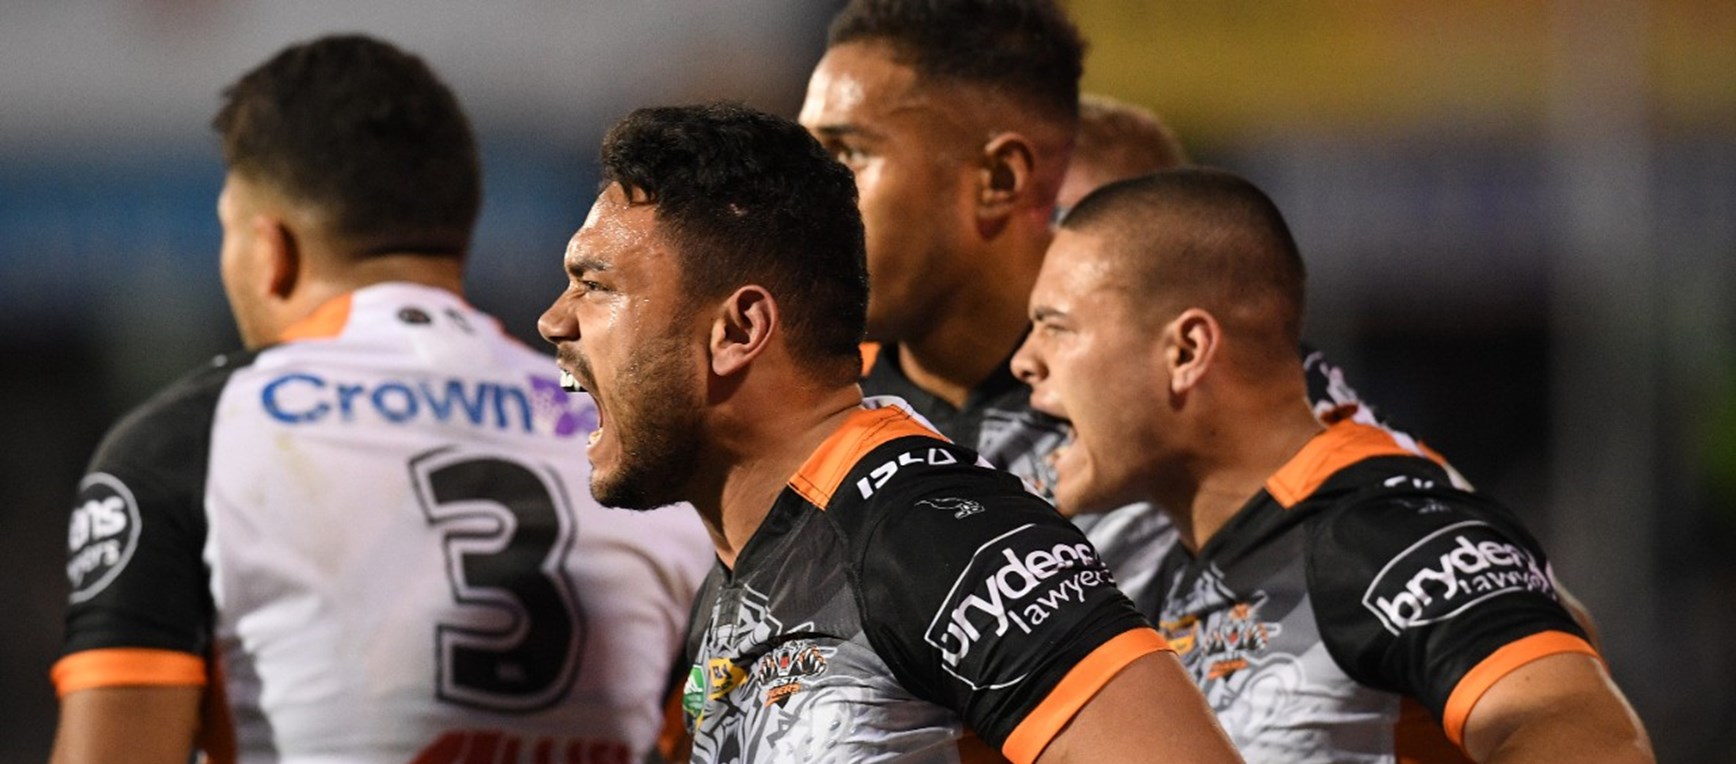 Gallery: NRL Round 22 vs. Panthers